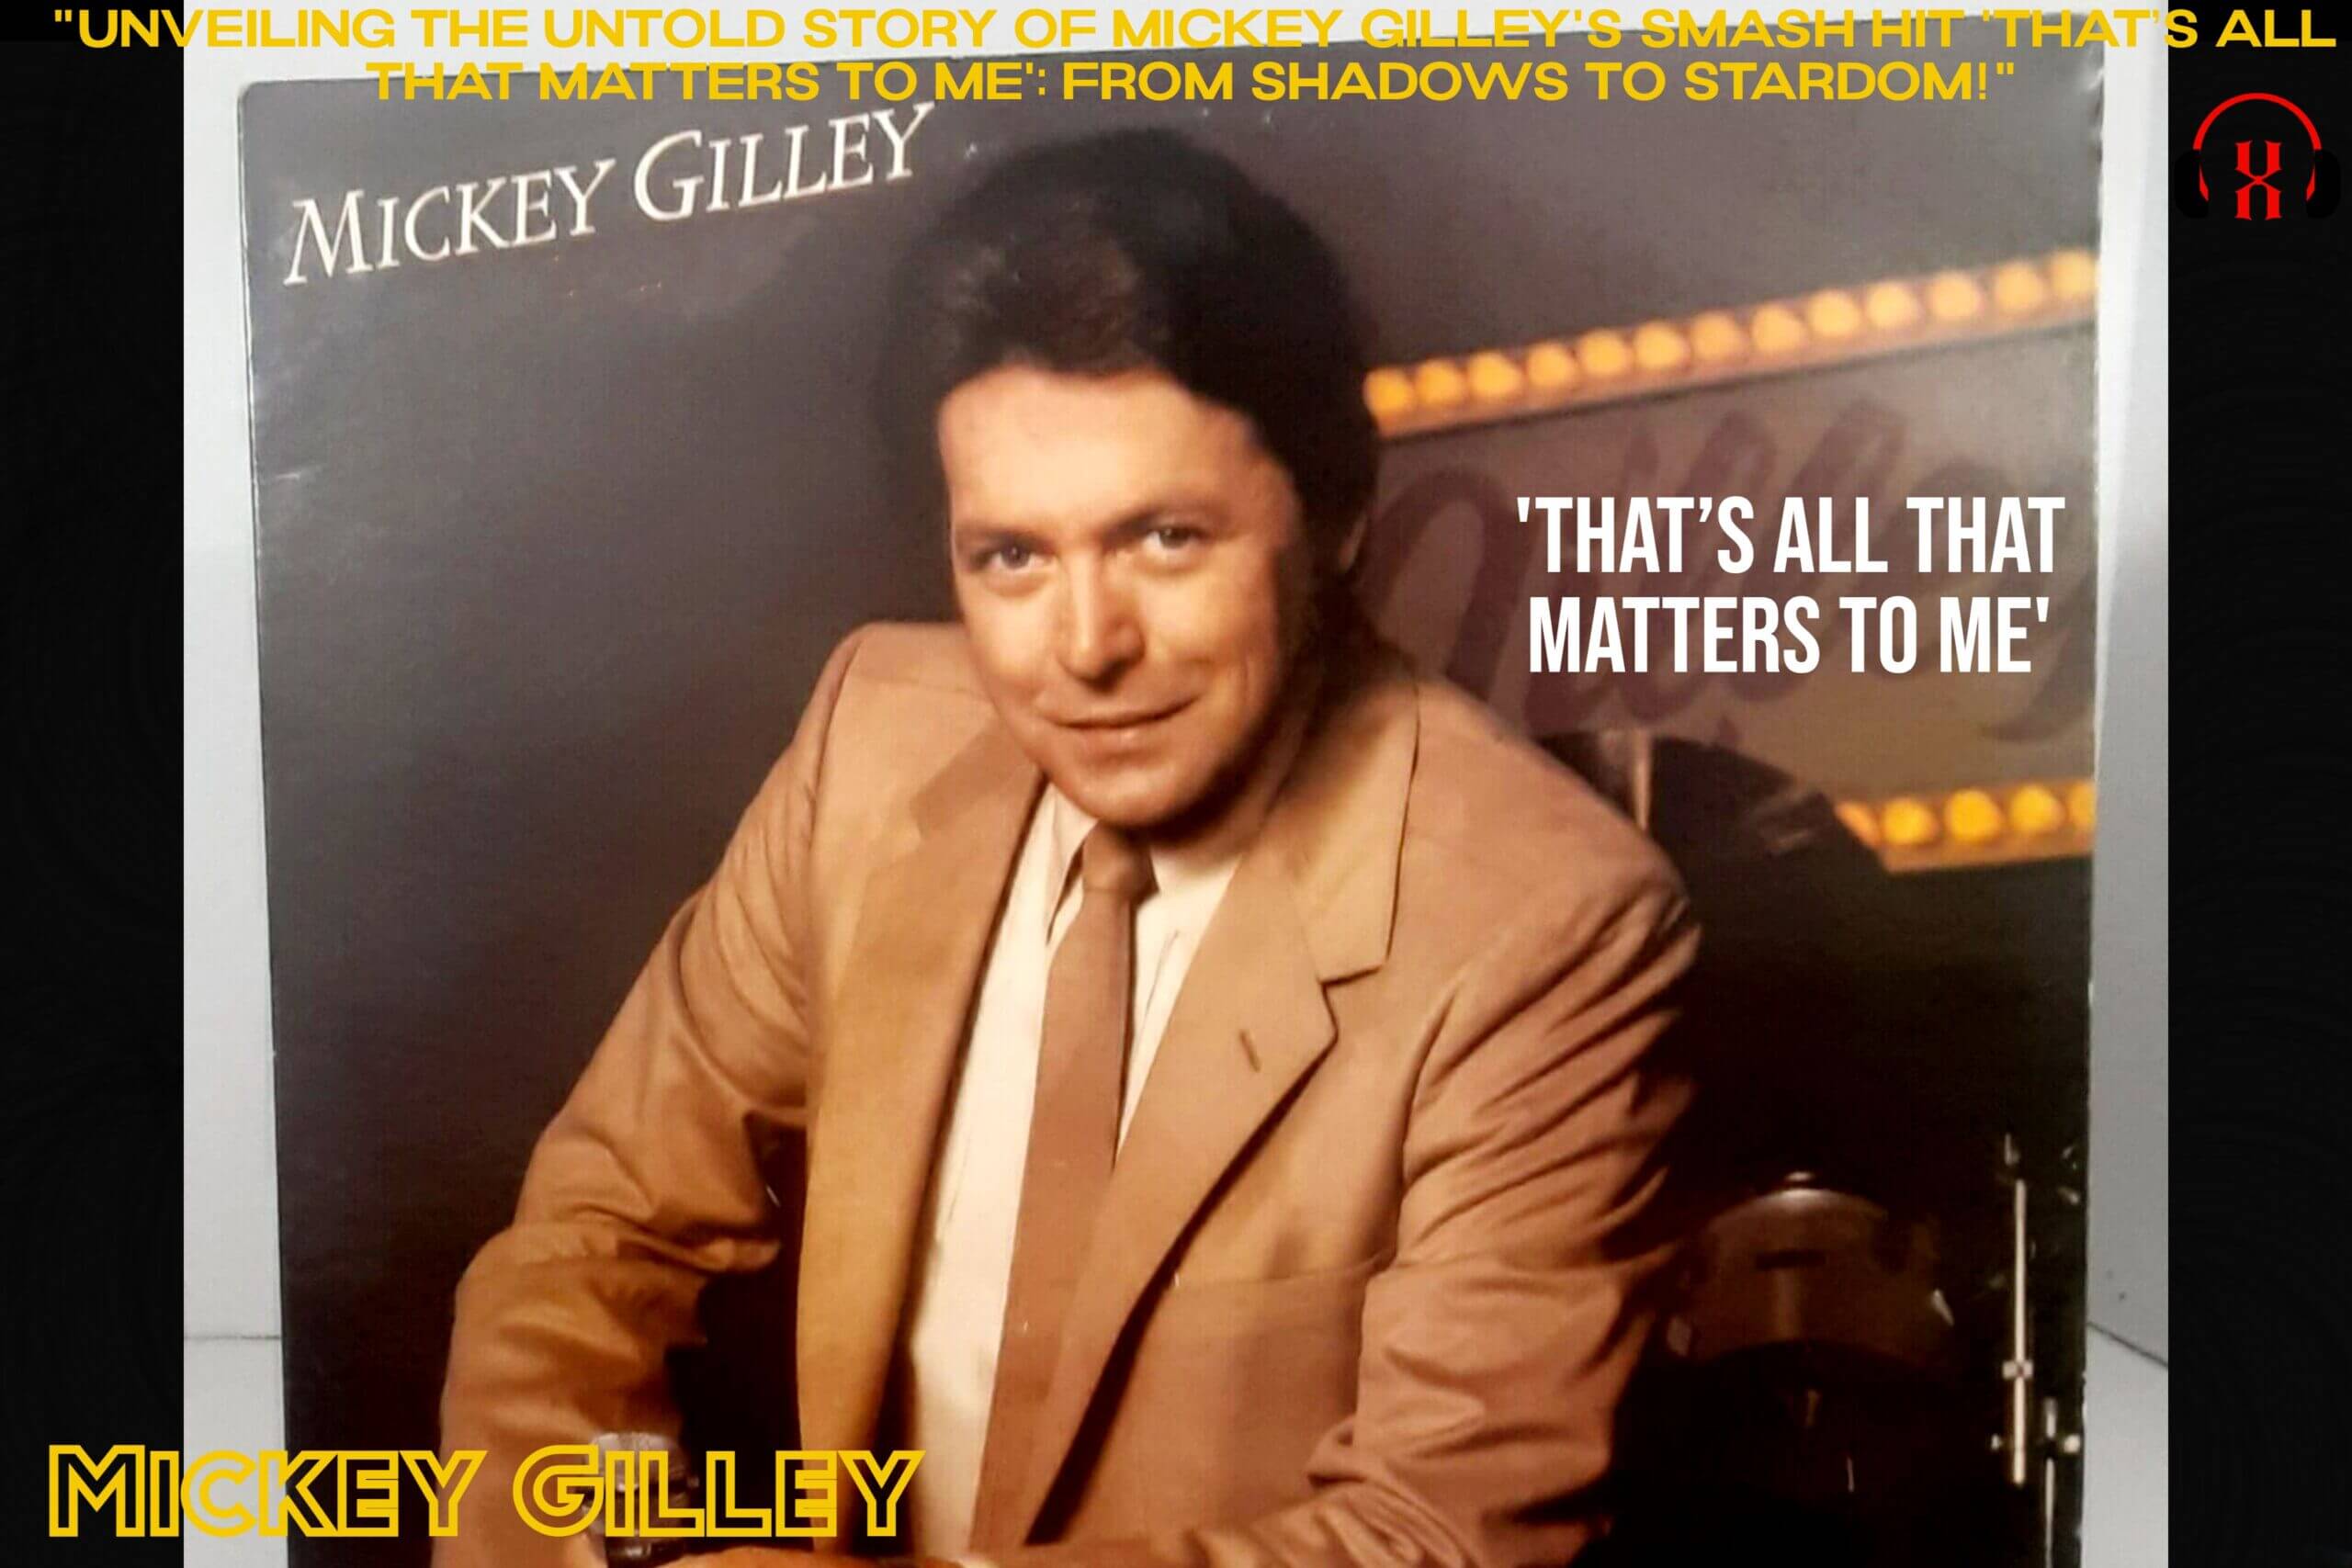 “Unveiling the Untold Story of Mickey Gilley’s Smash Hit ‘That’s All That Matters To Me’: From Shadows to Stardom!”